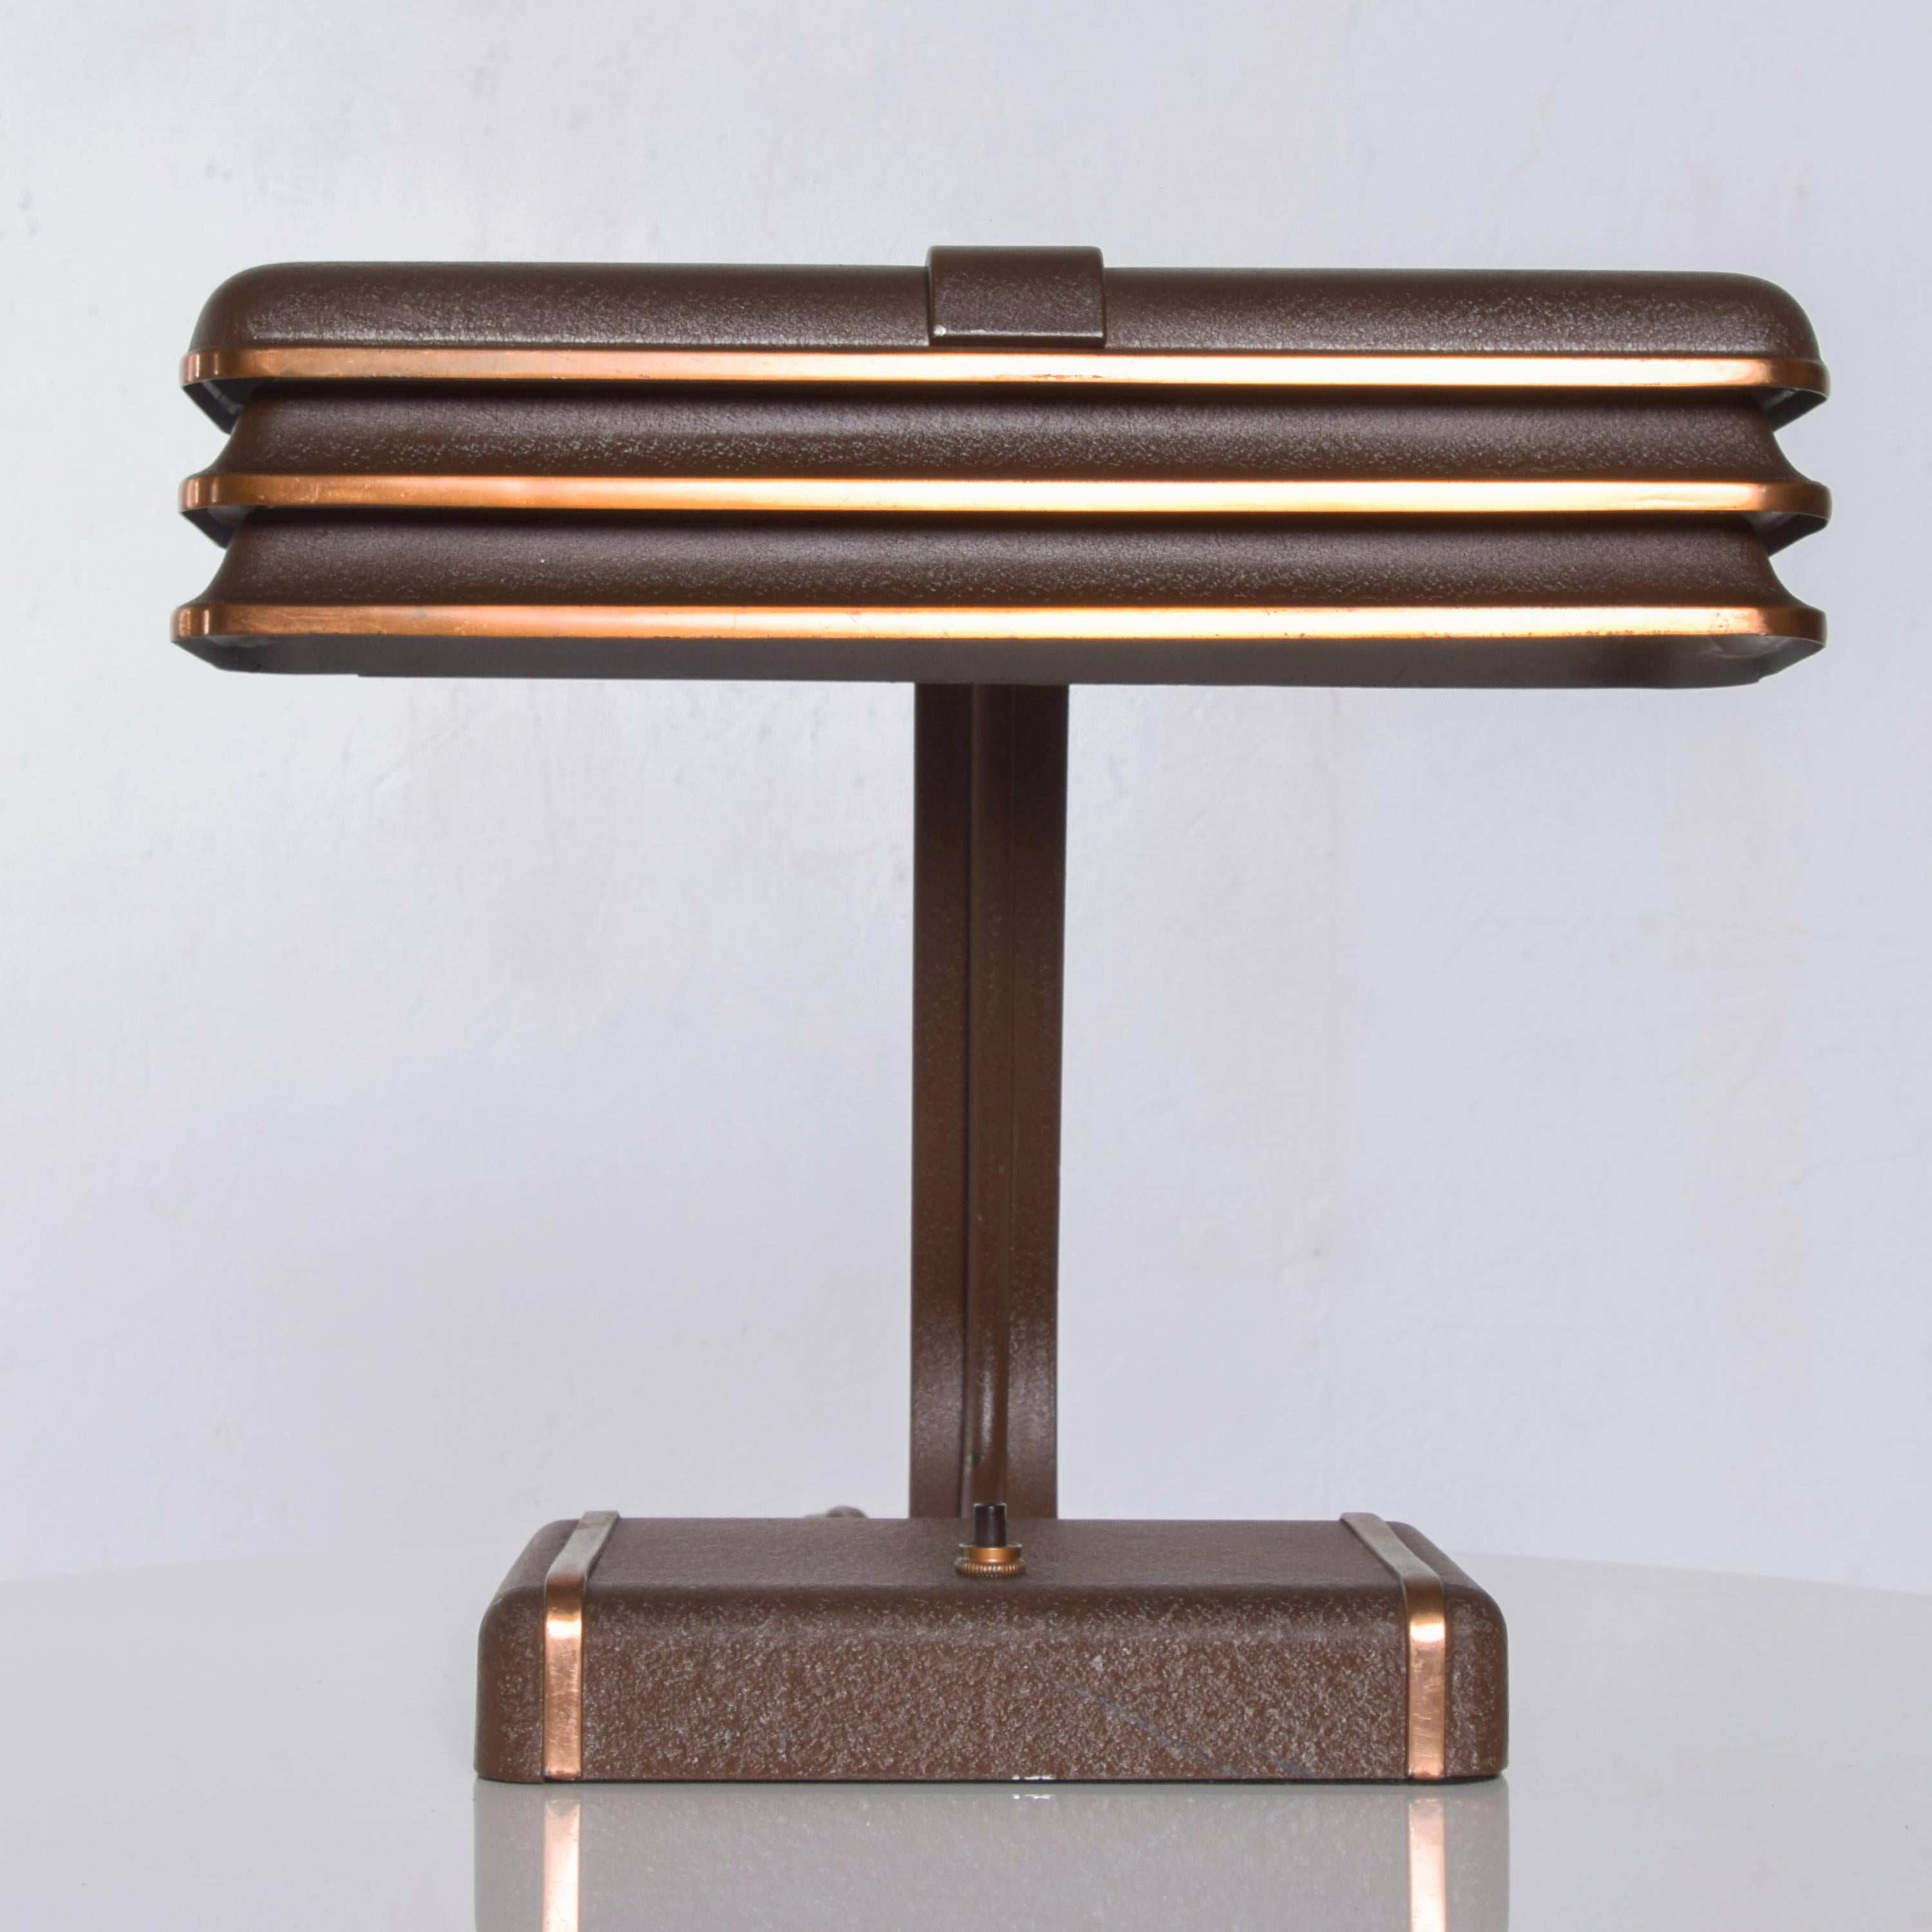 Streamline Industrial modern Art Deco metal table desk lamp attributed to the style of Donald Deskey, circa 1930.
Crafted in metal with brown power coat finish and copper plating.
Measures: 11